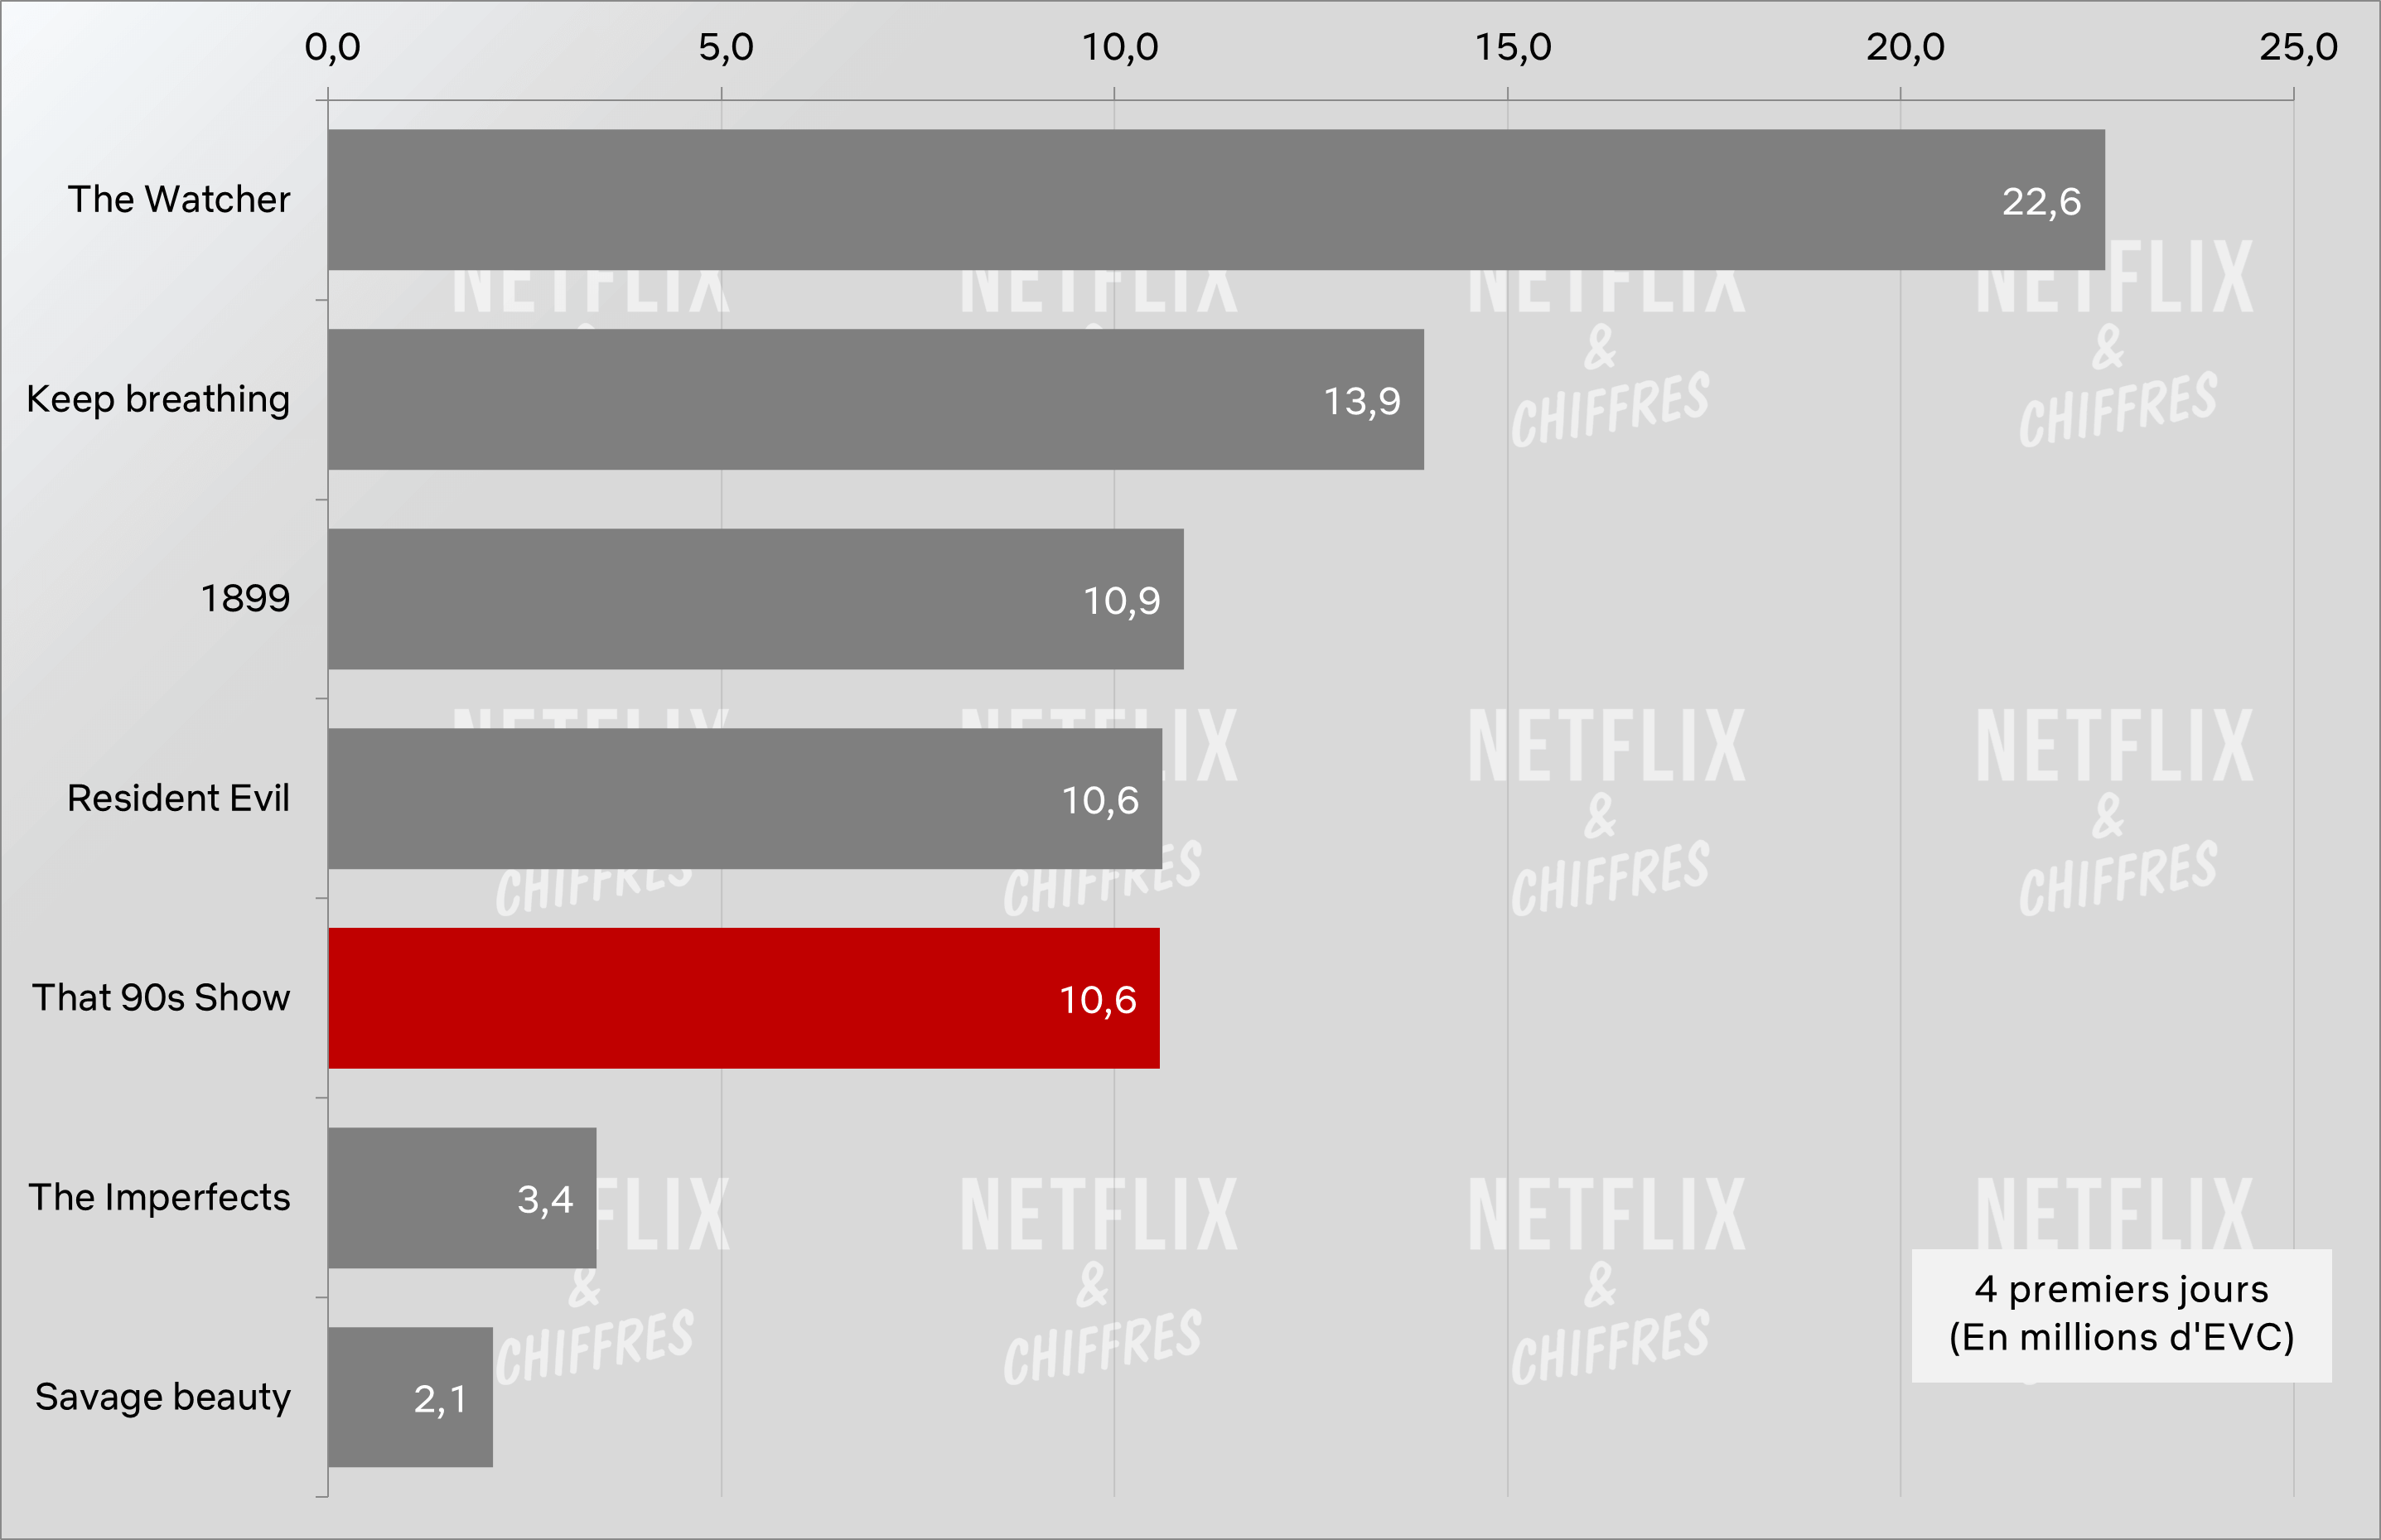 that 90s show vs other netflix show viewership at launch